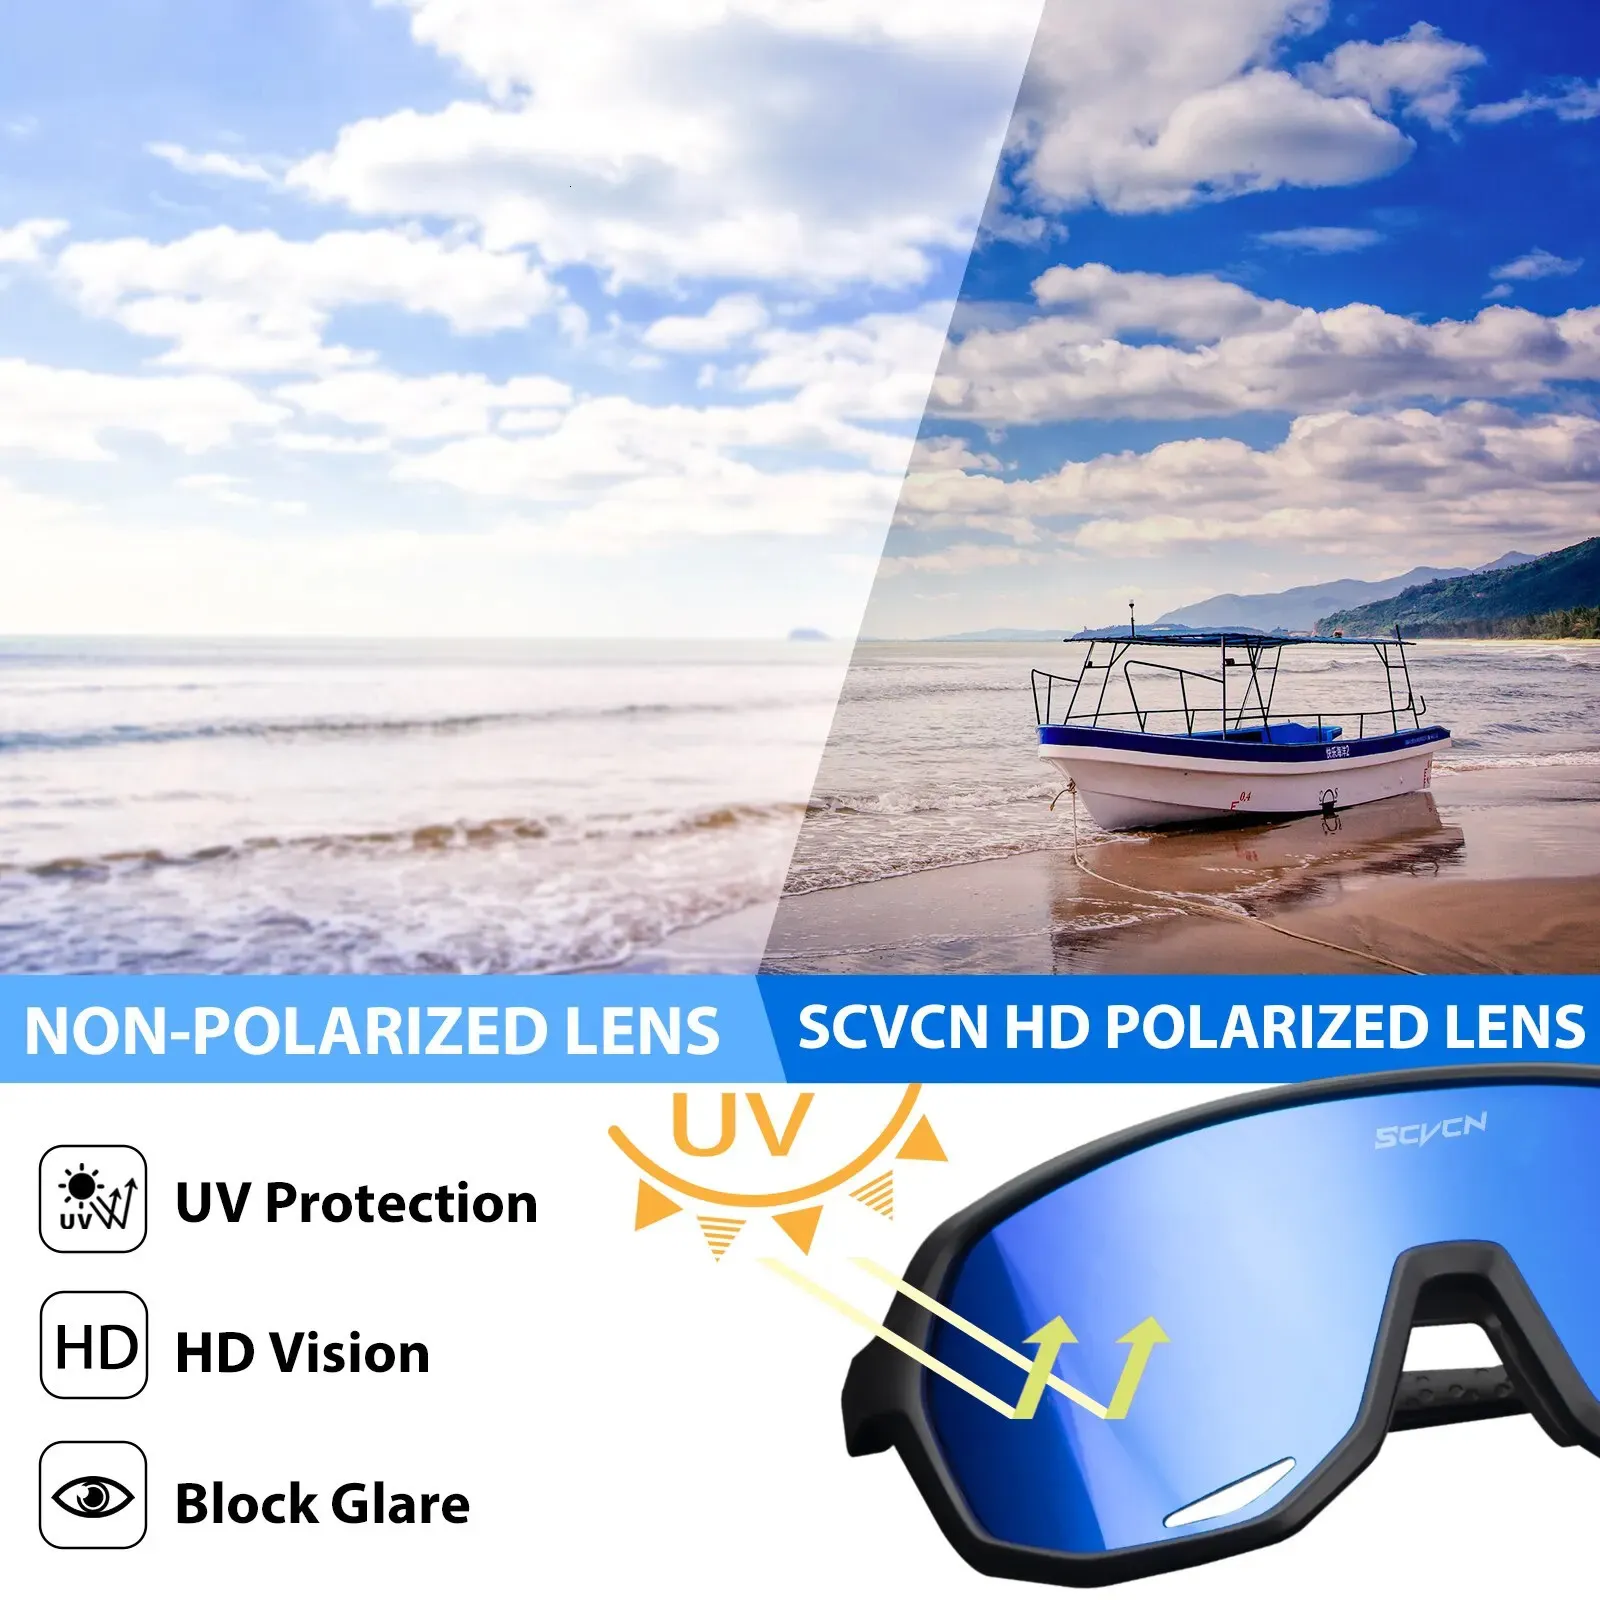 Scvcn Fishing Sunglasses Square Polarized UV400 Glasses For Men Women  Driving Golf Running Cycling Eyewear 231221 From Bei09, $9.49